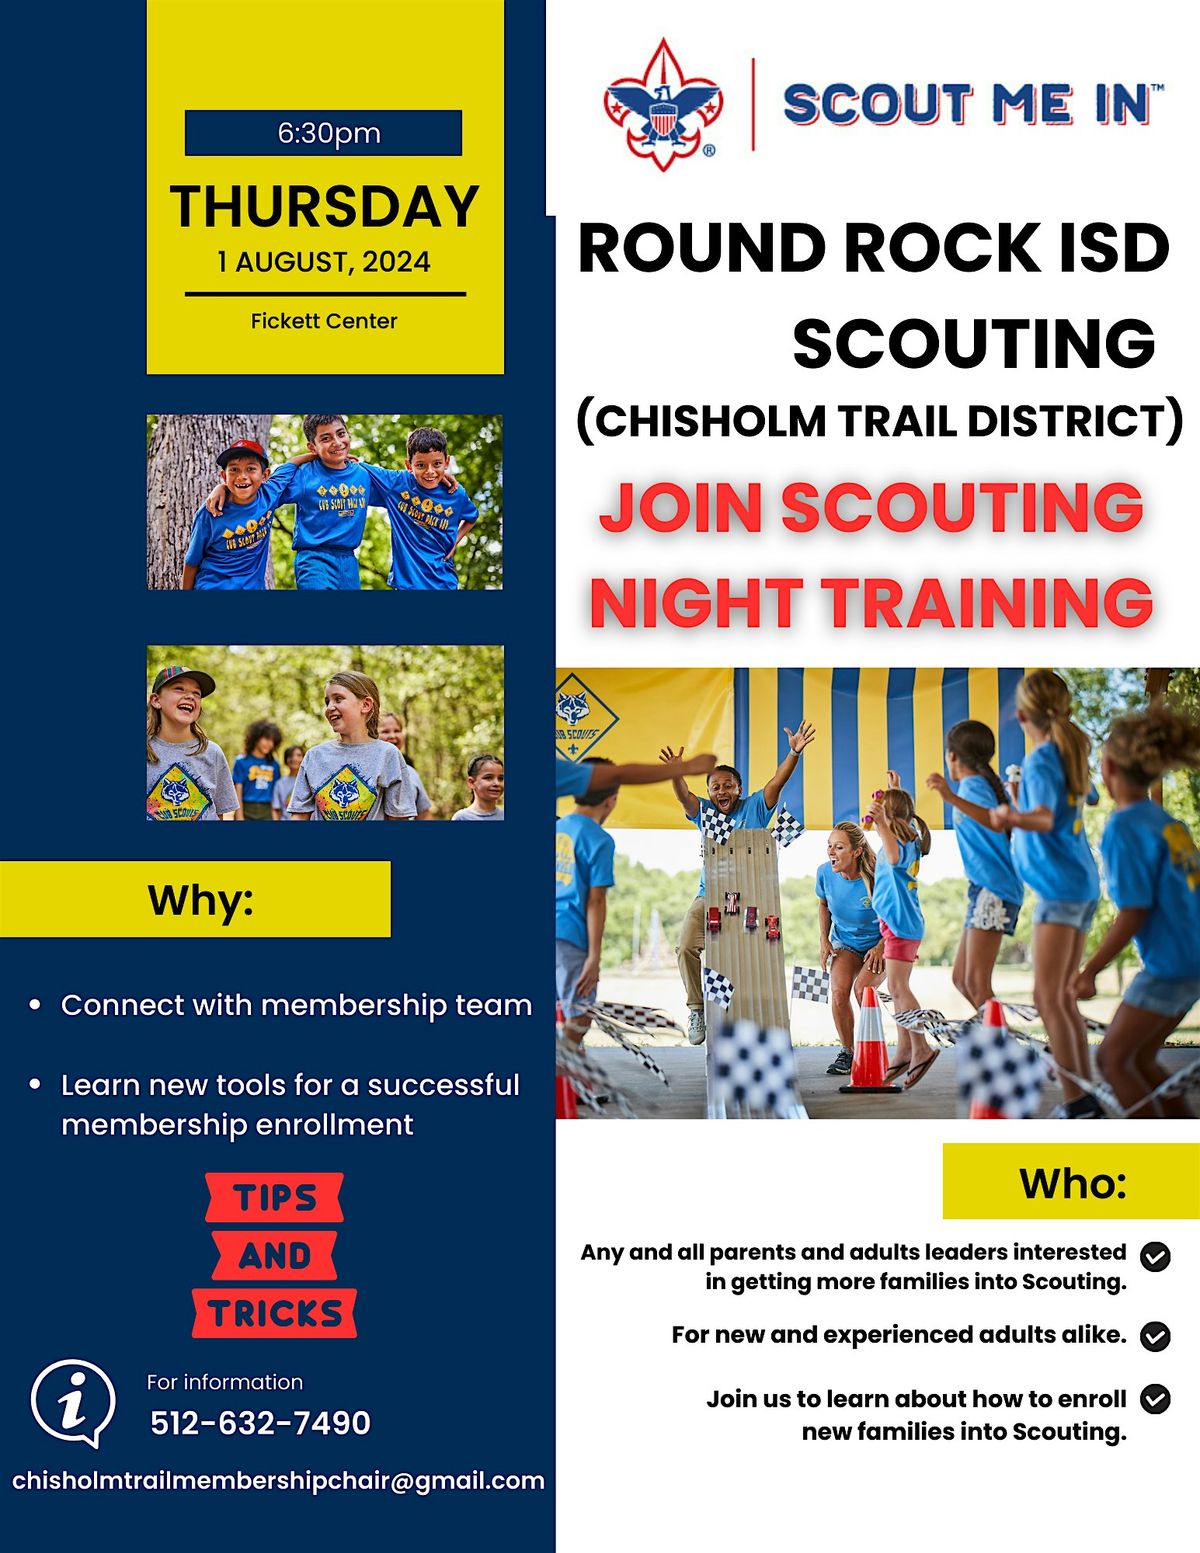 Round Rock (Chisholm Trail District) Join Scouting Night Training